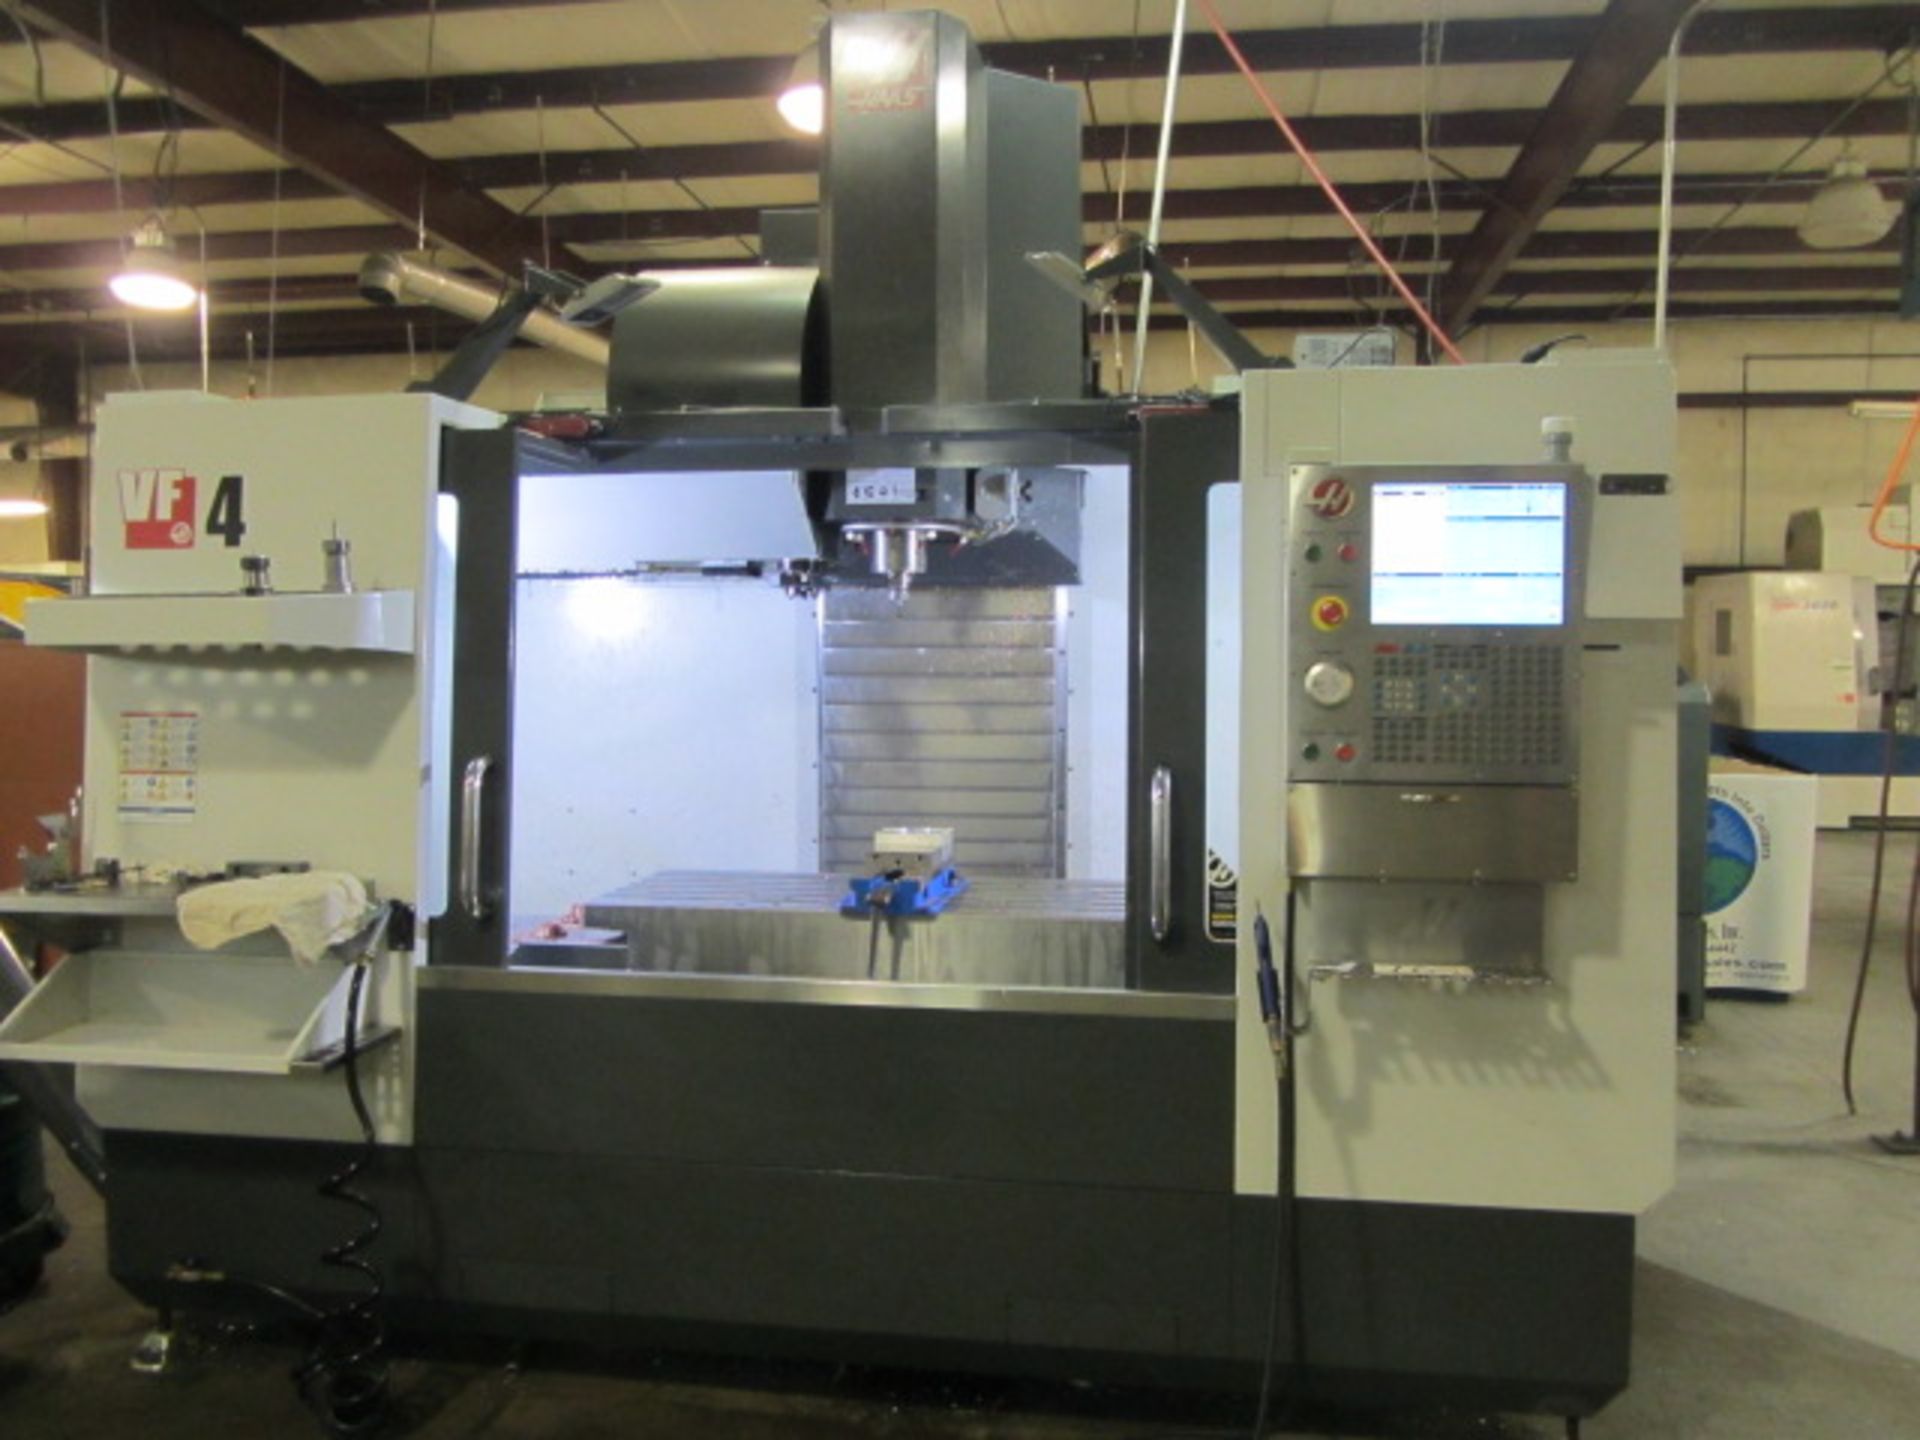 Haas VF-4 CNC Vertical Machining Center with 52'' x 20'' Table, #40 Taper Spindle Speeds to 8100 - Image 3 of 8